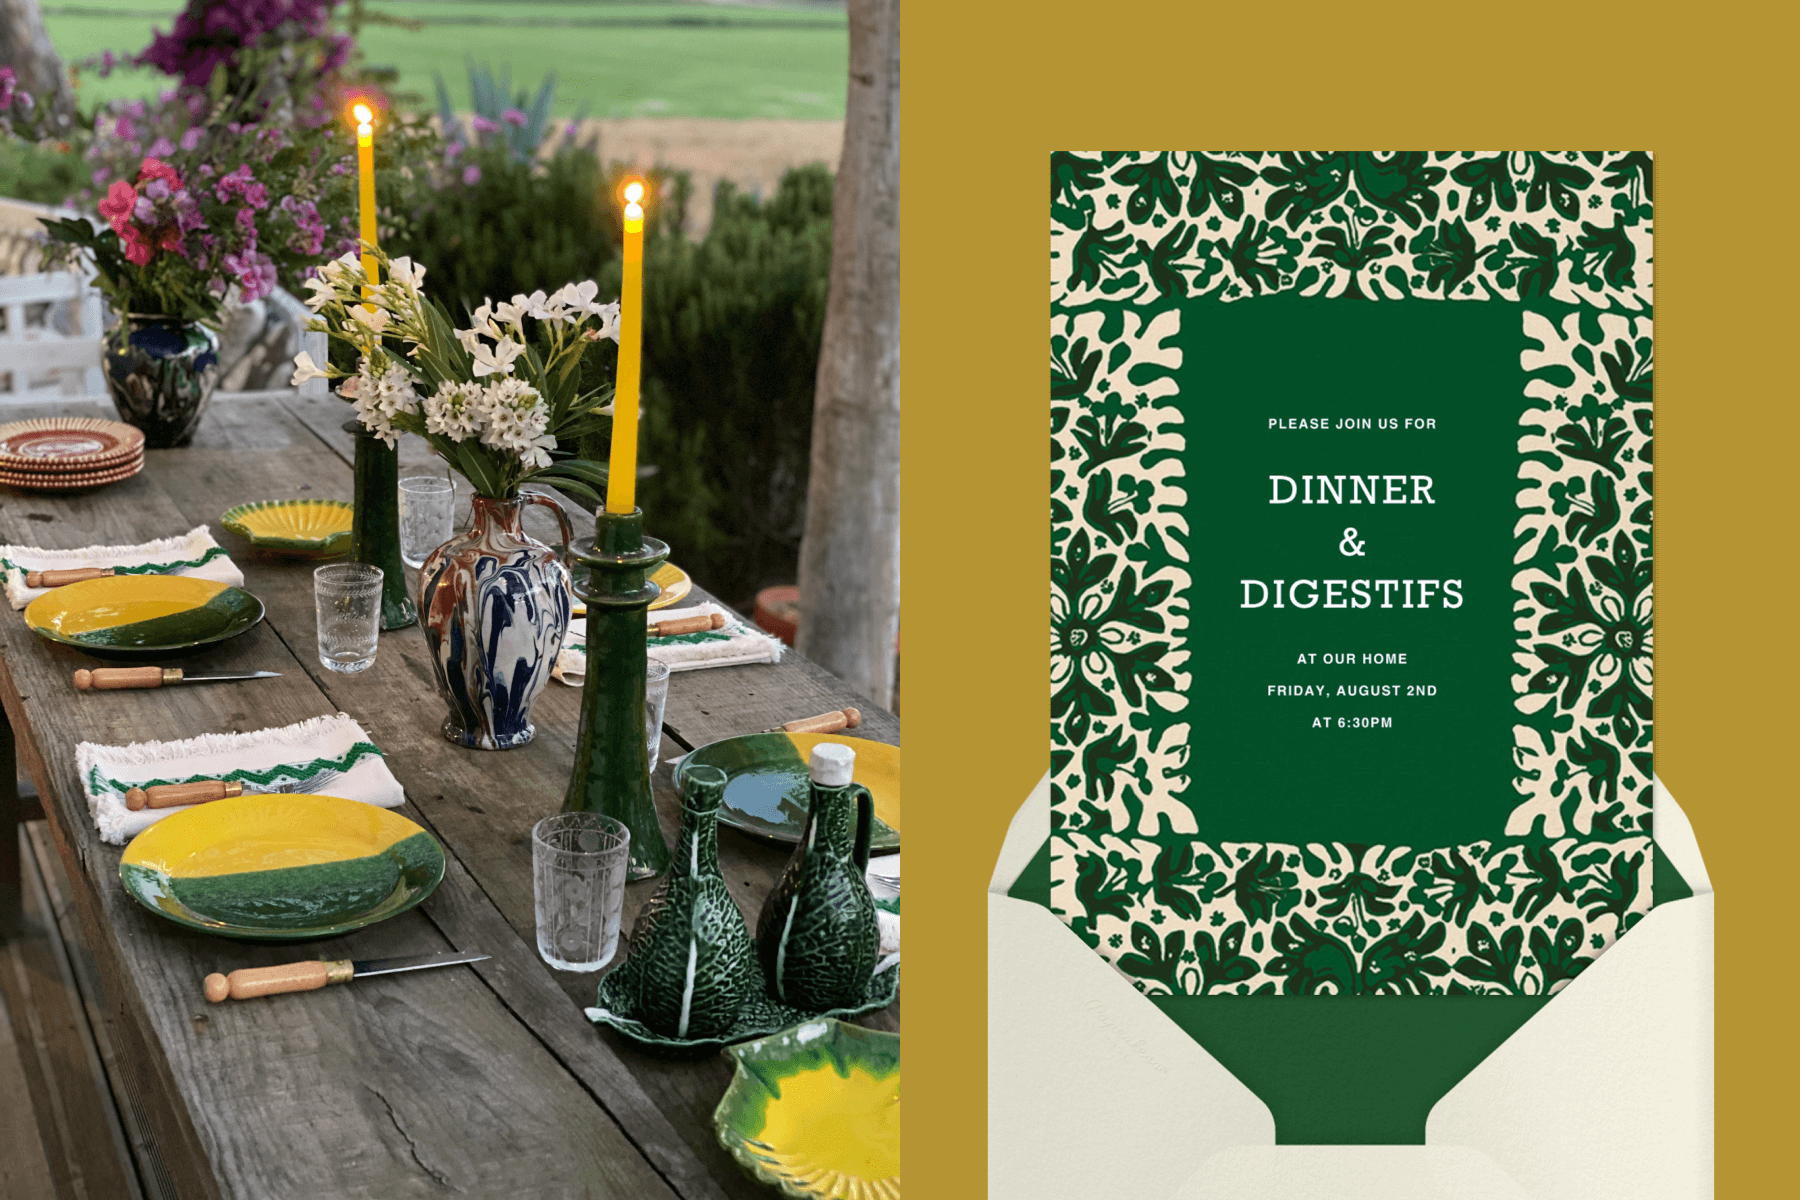 Left: A picnic table with beautiful tabletop decor including tall taper candles and vases; Right: A green floral summer party invitation